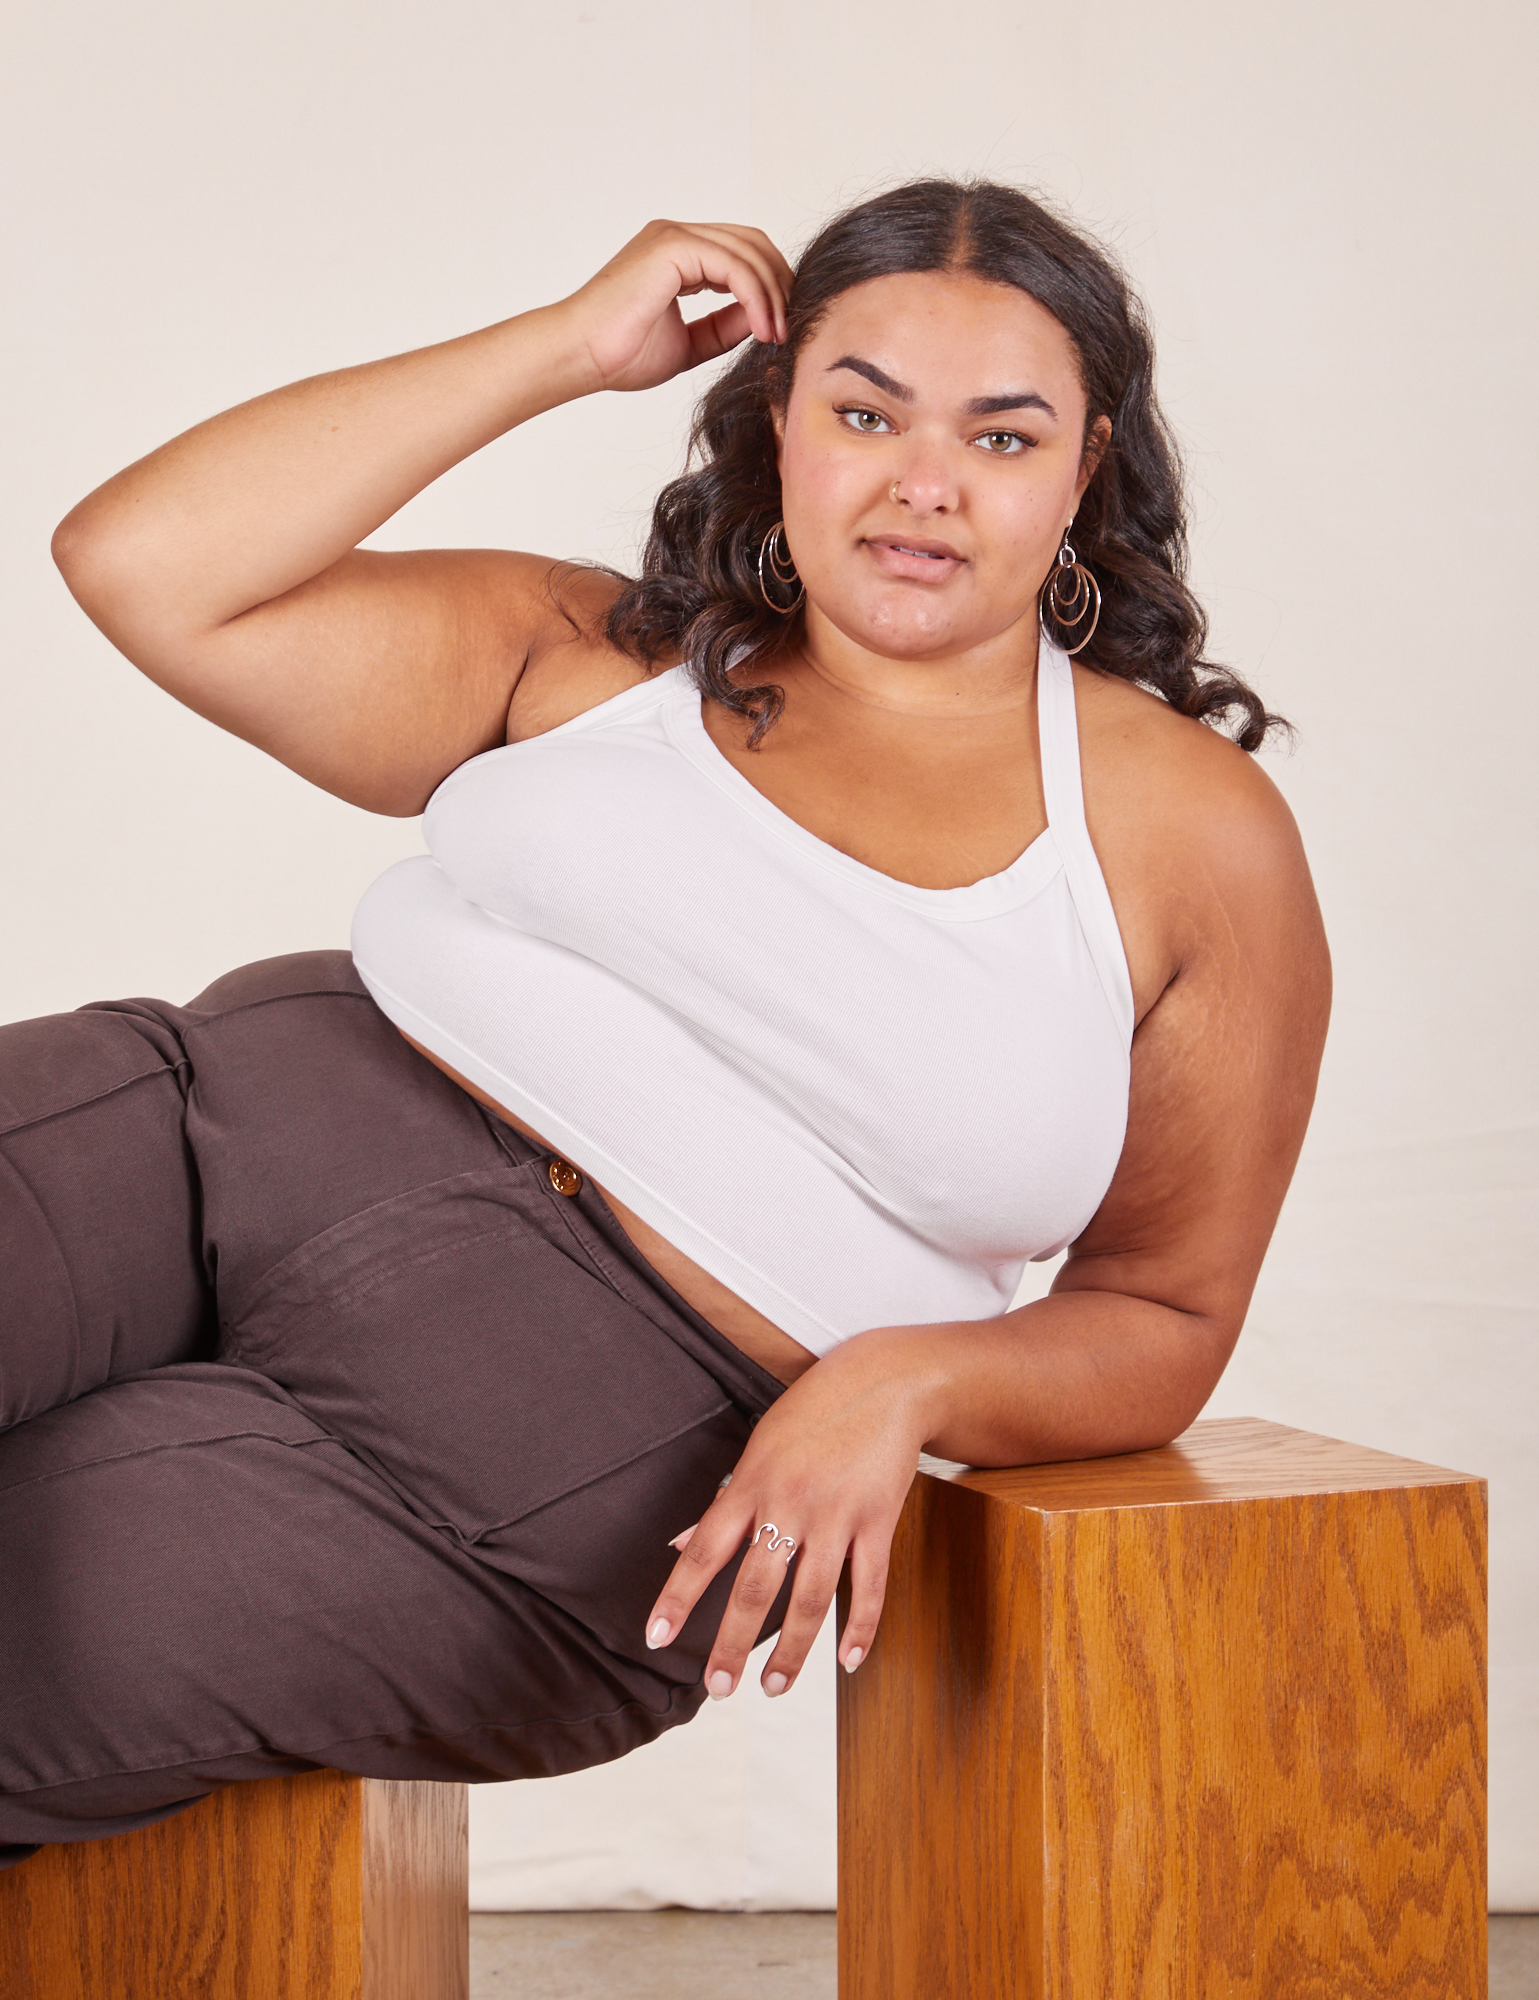 Alicia is 5&#39;9&quot; and wearing XL Halter Top in Vintage Tee Off-White paired with espresso brown Western Pants. She is sitting sideways on a wooden box and her right elbow is leaning on another wooden box.